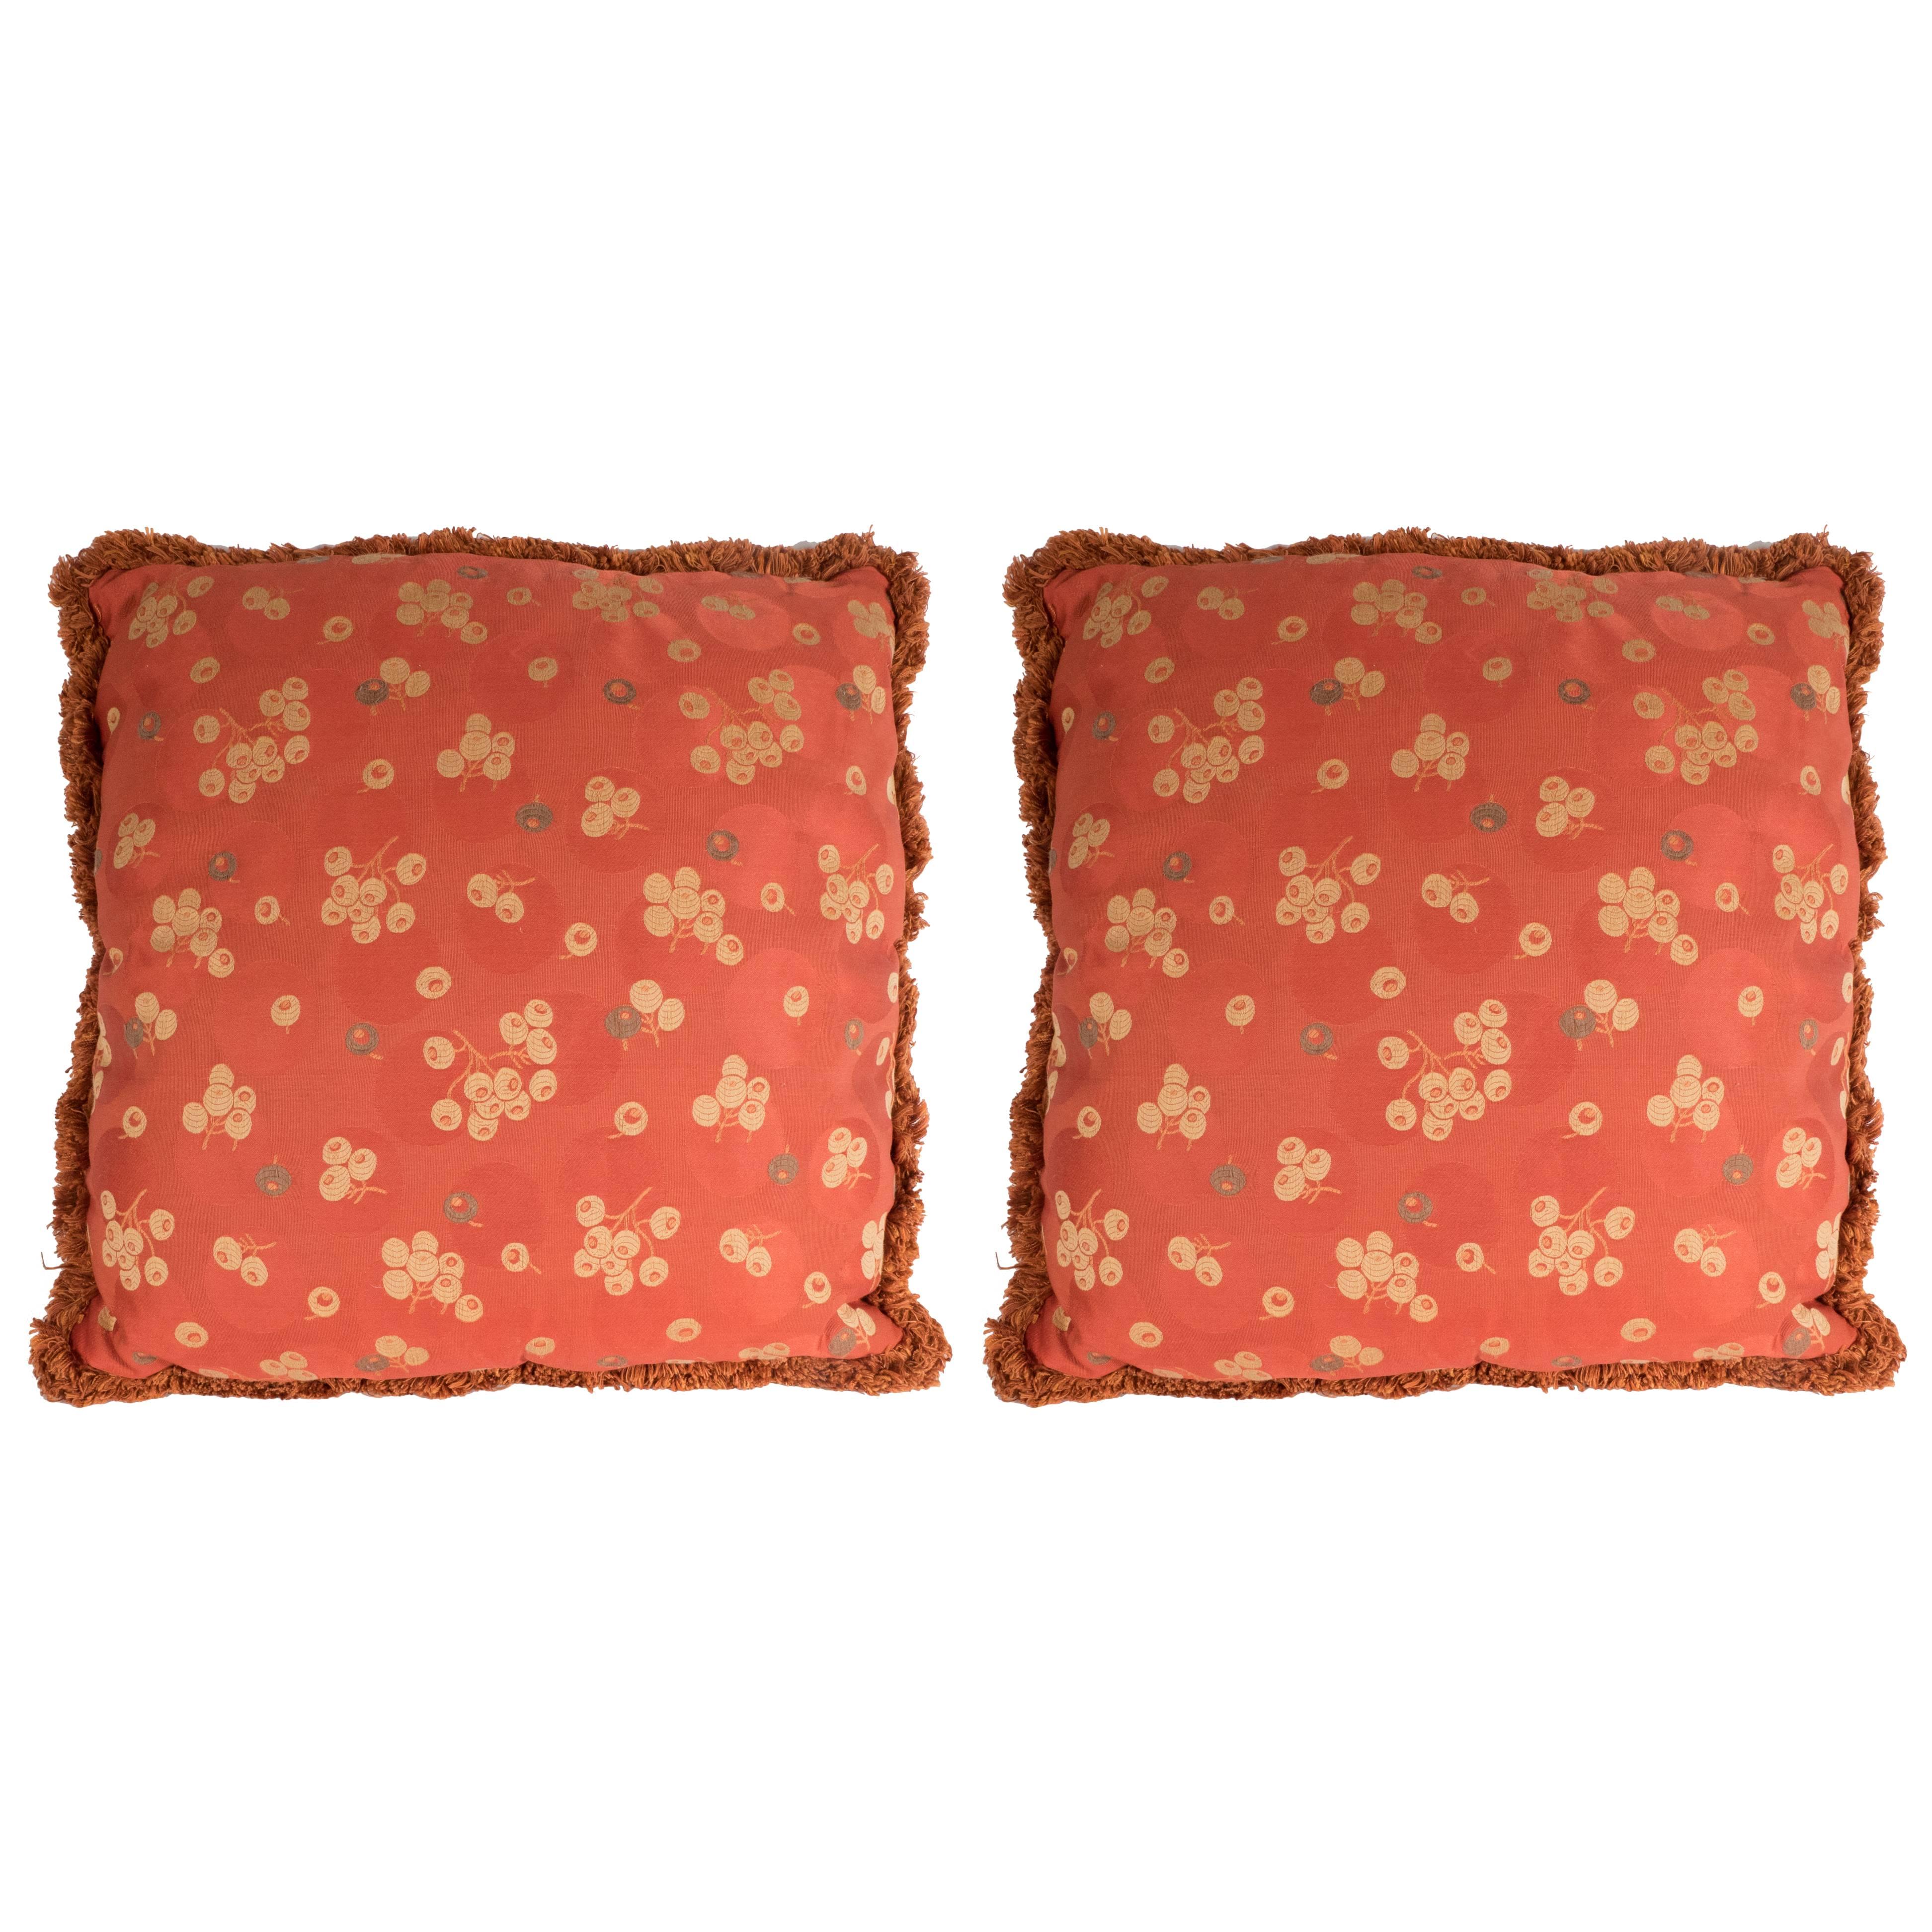 Pair of Modernist Carnelian Red and Tan Japonisme Inspired Pillows